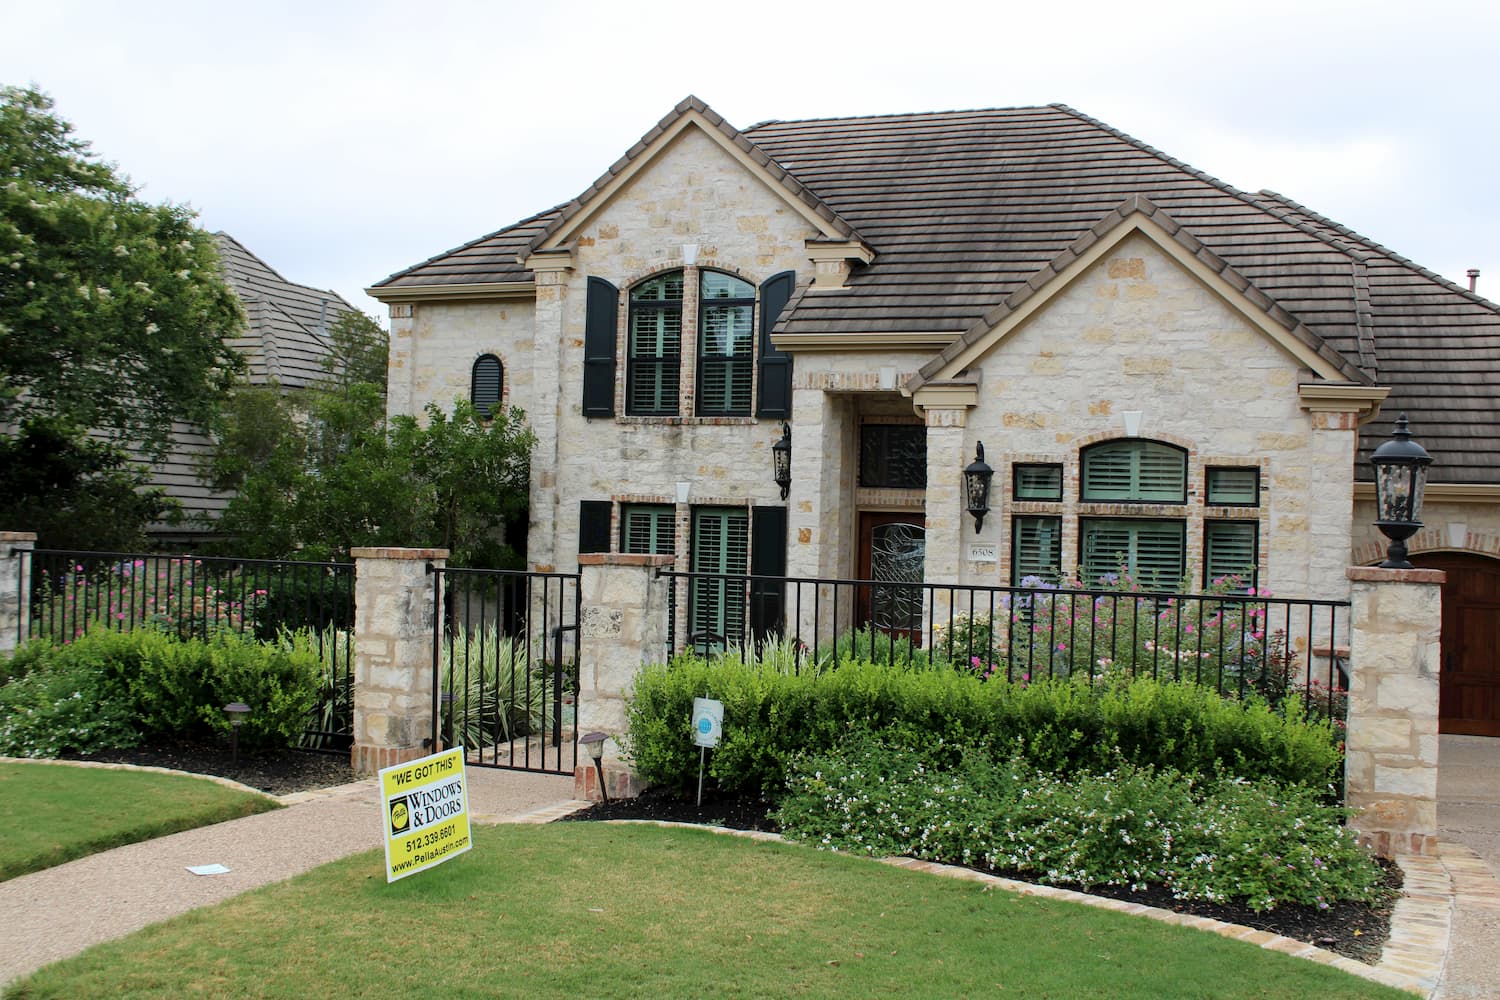 Exterior shot of Austin area home with Pella sign in front yard